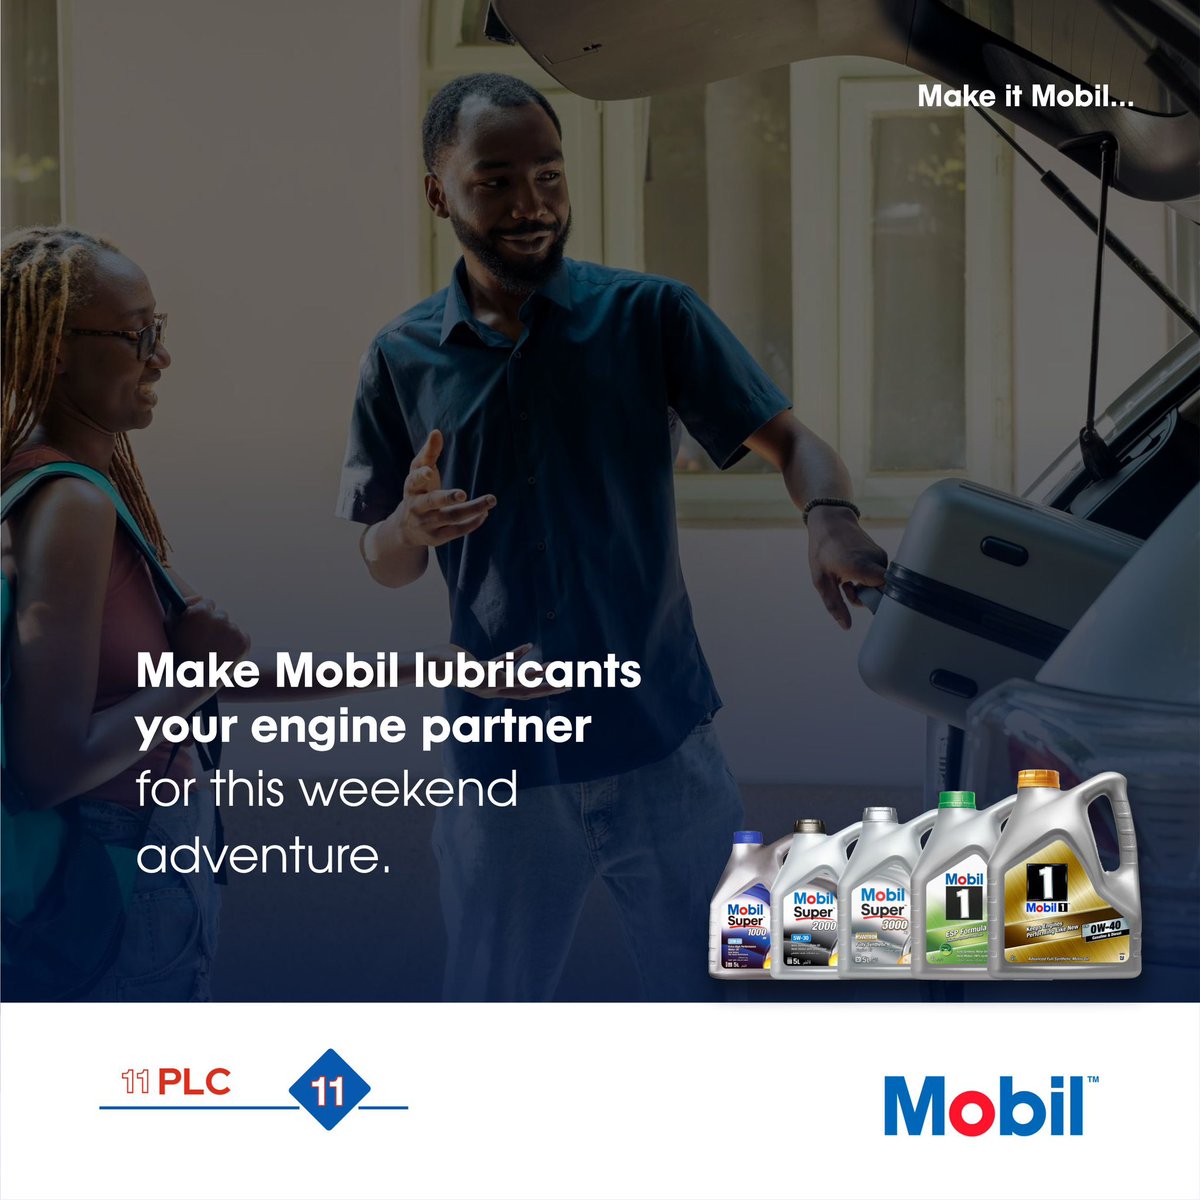 Make Lubricants you go to Lubricants for your weekend adventures.

#weekendadventures #enginecare #PerformanceBoost #driveconfindently #MobilLubricants #mobilinnigeria